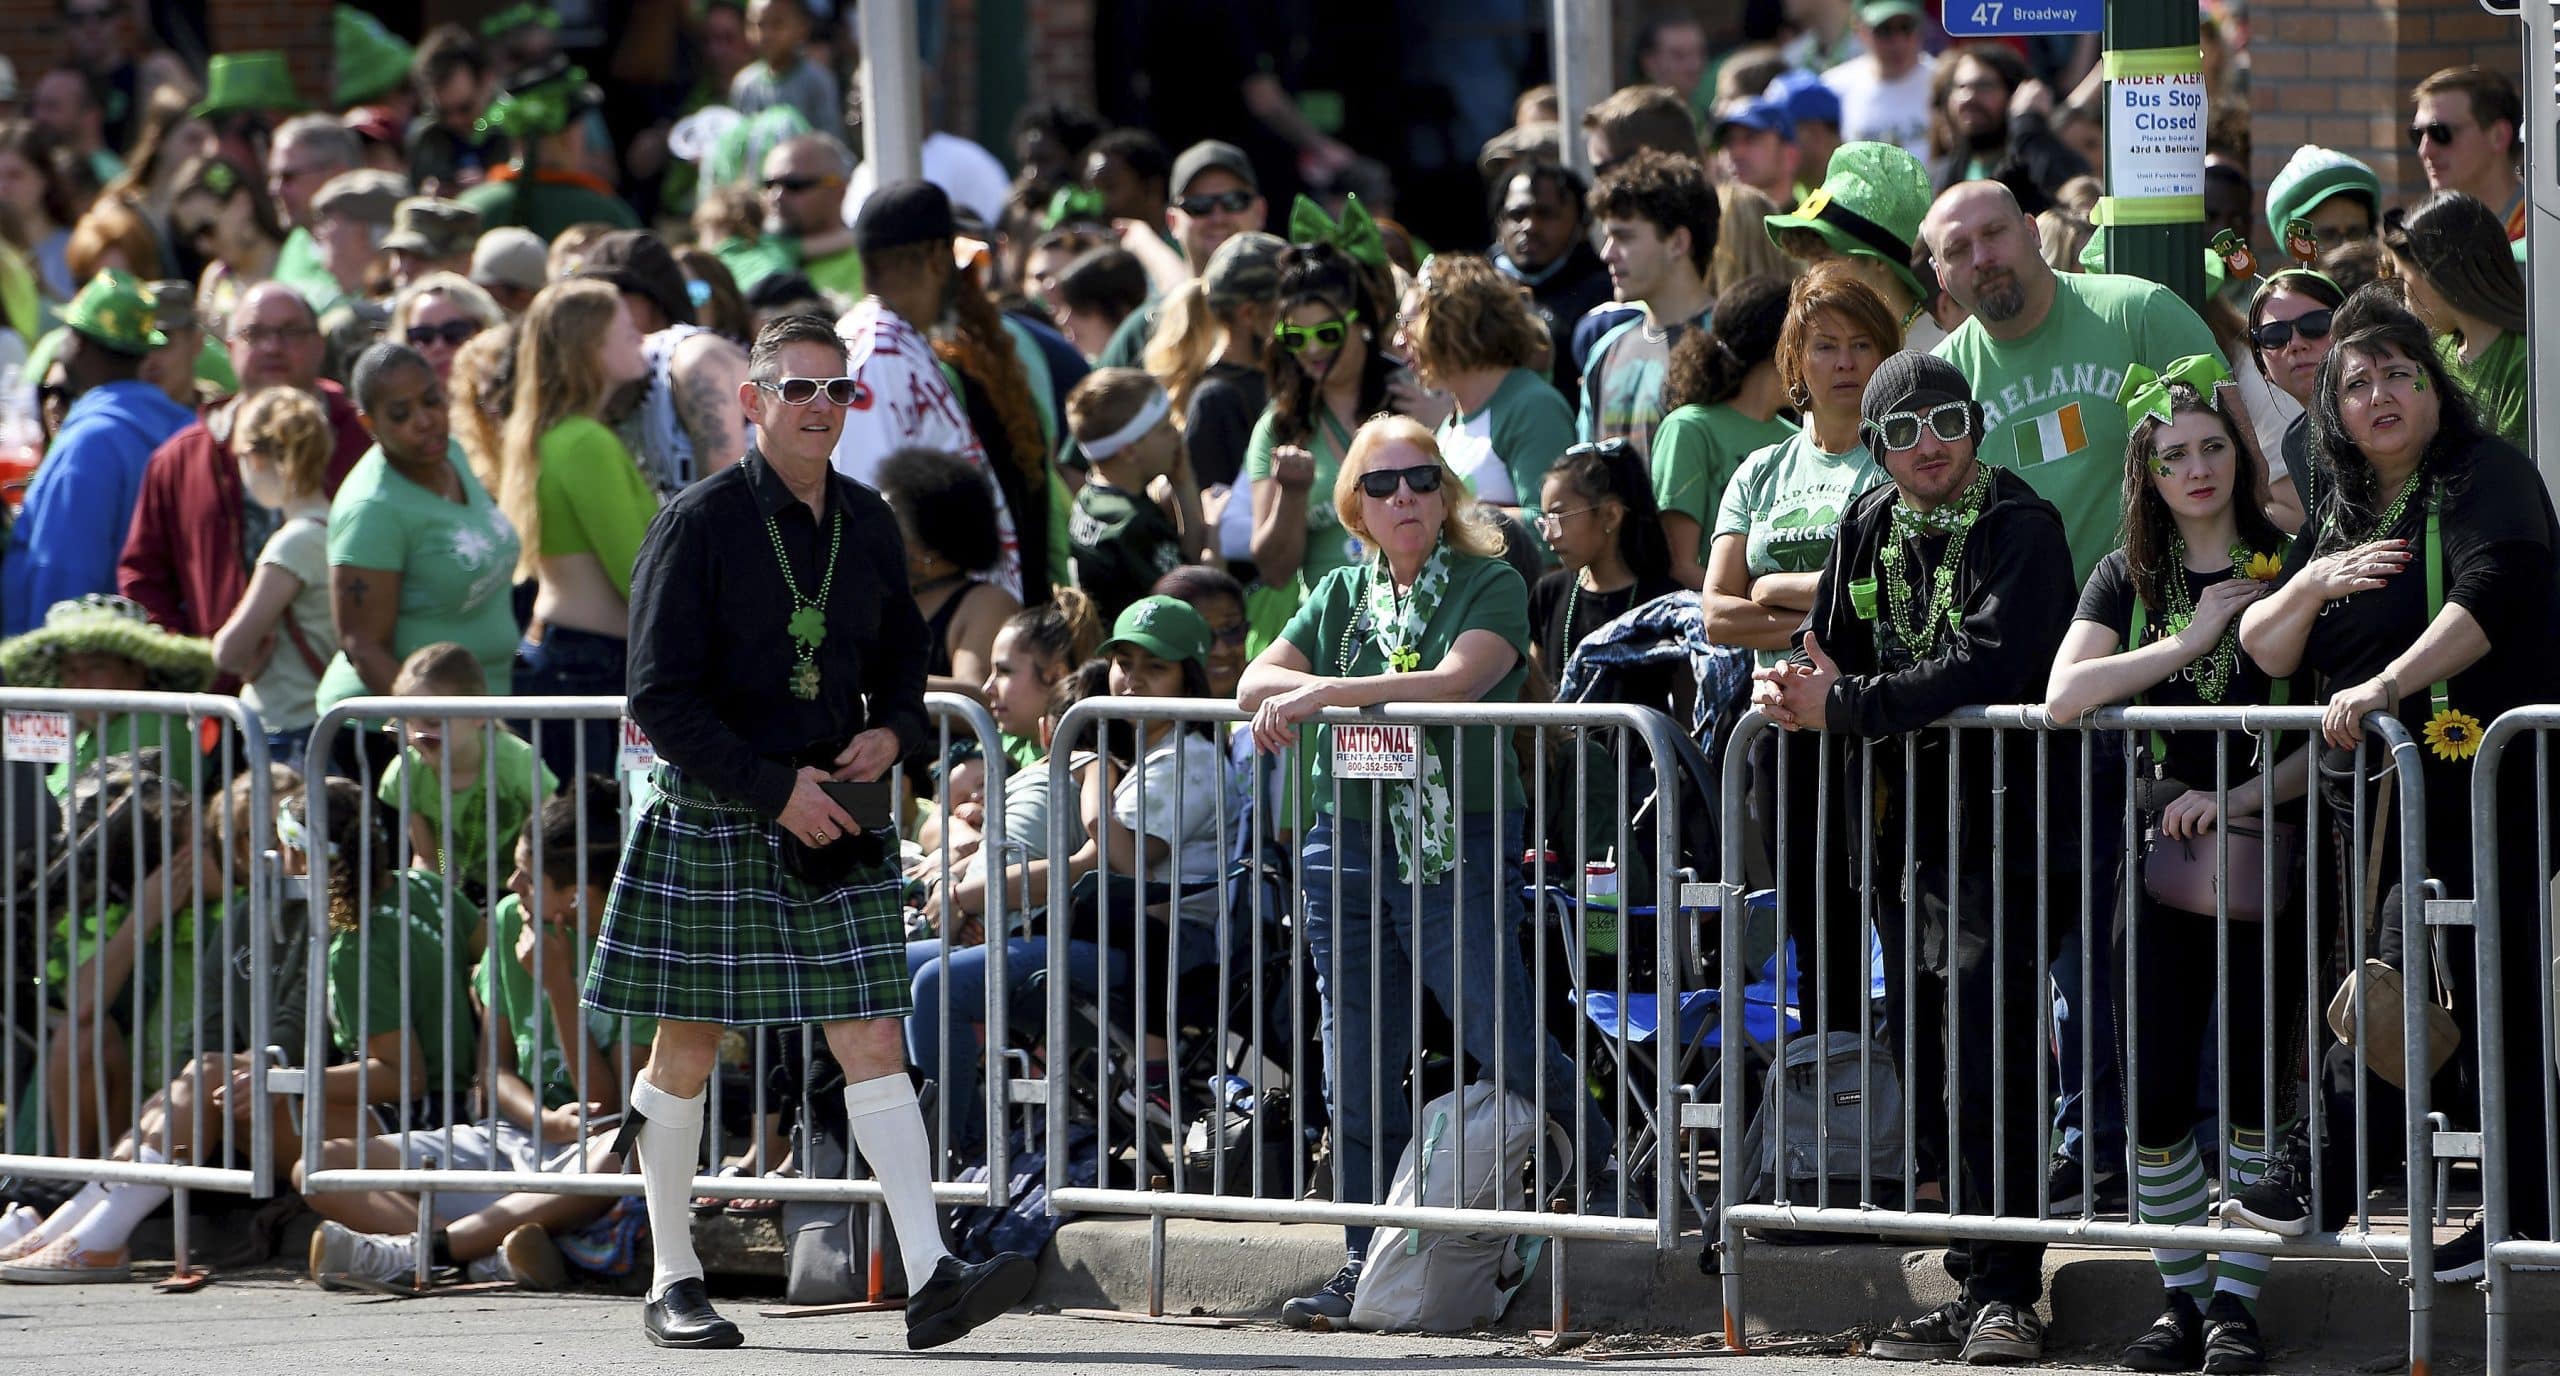 St. Patrick’s parade will be Kansas City’s first big event since the